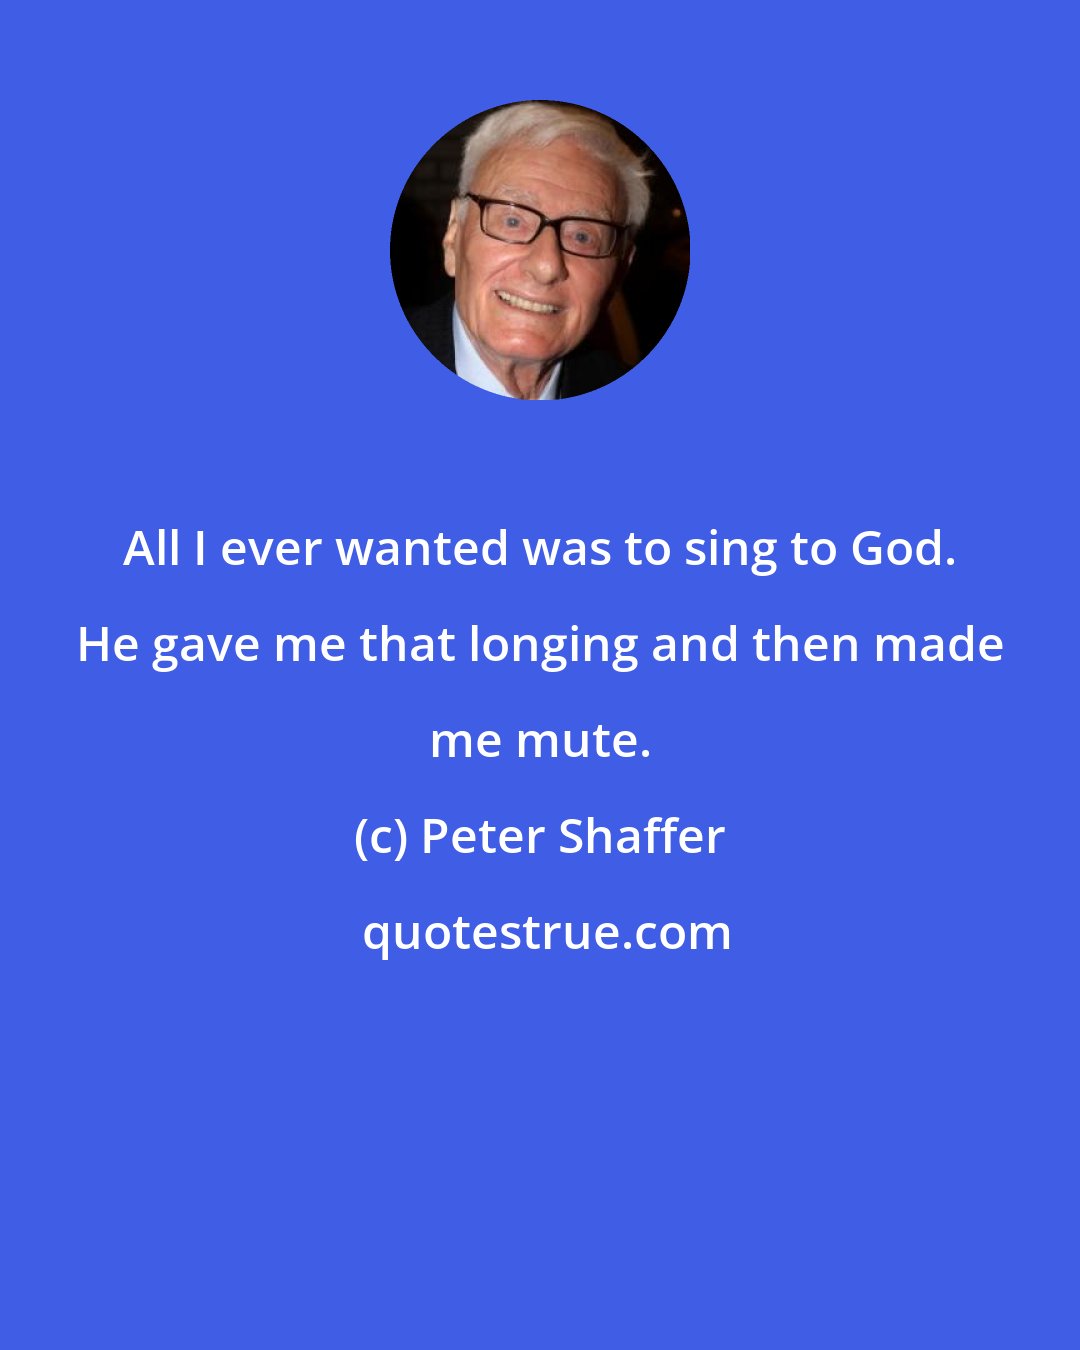 Peter Shaffer: All I ever wanted was to sing to God. He gave me that longing and then made me mute.